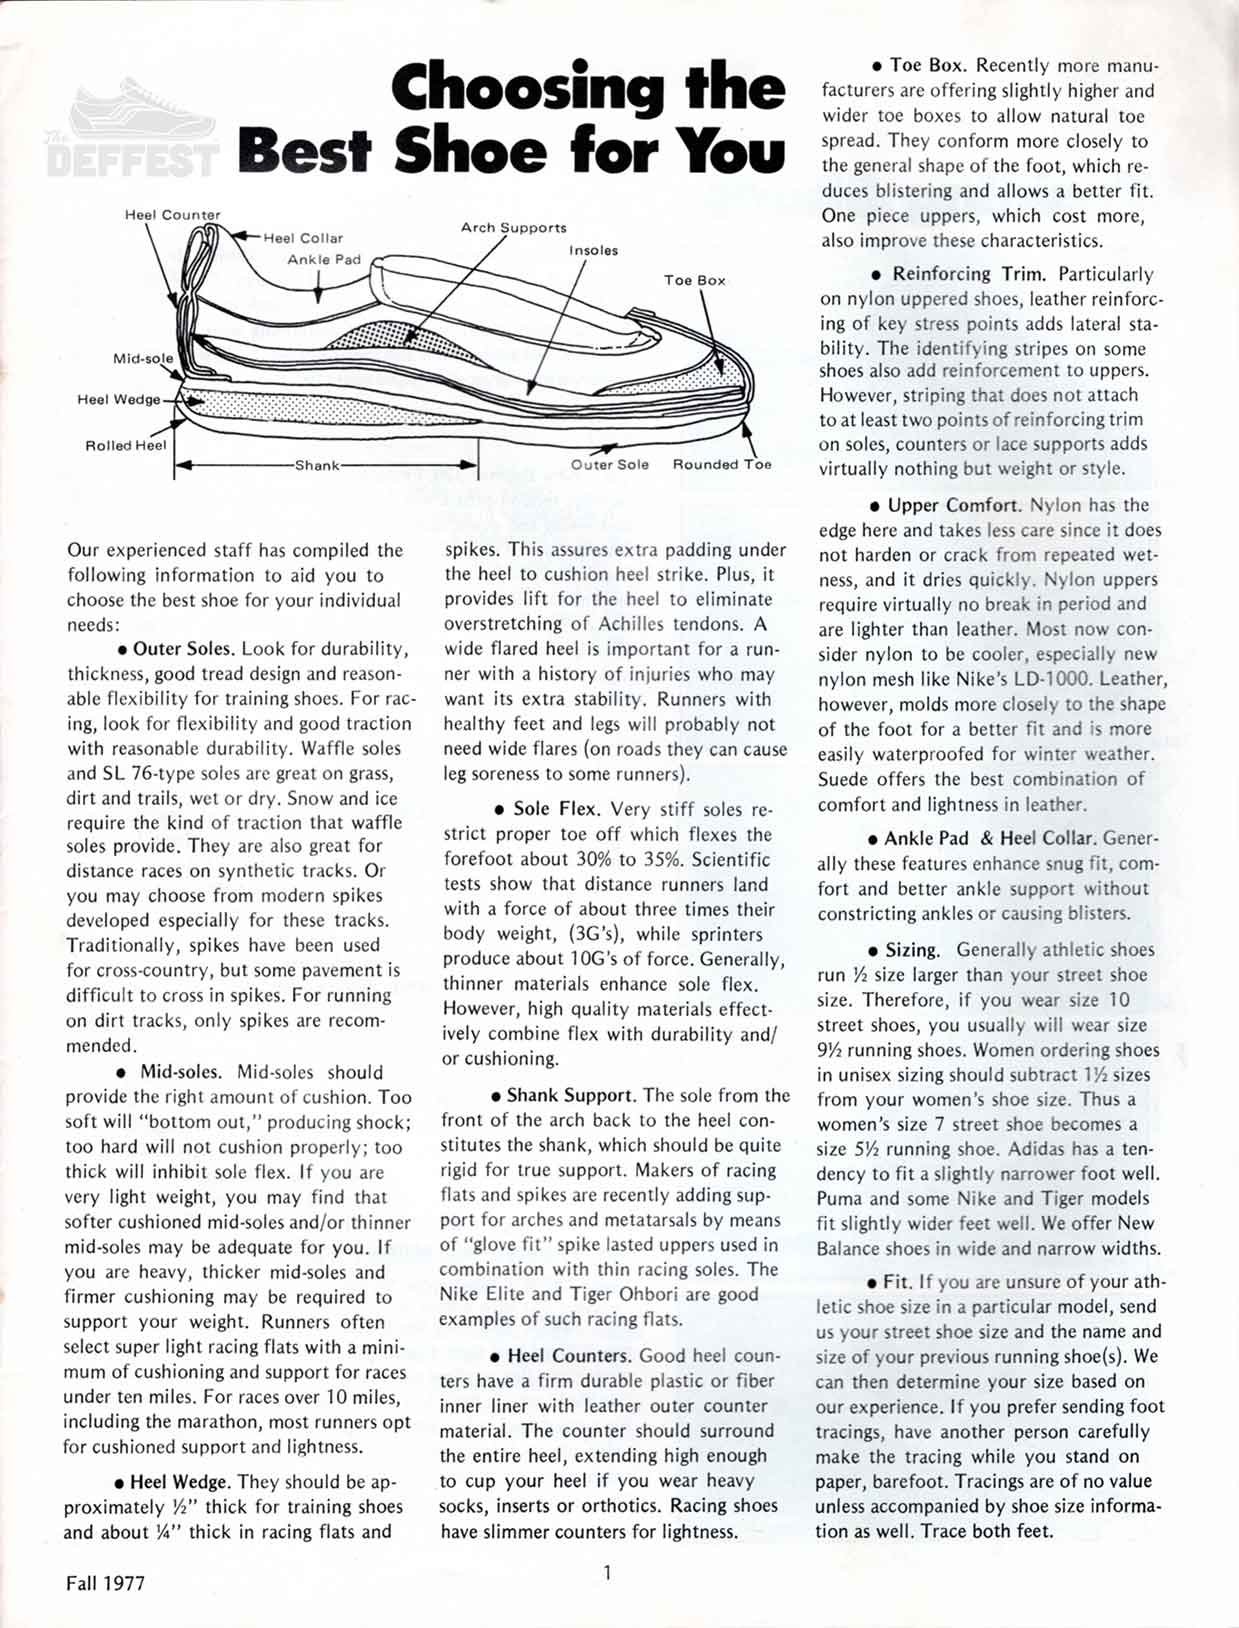 Starting Line Sports 'The Complete Runner's Catalog' Fall 1977 Article